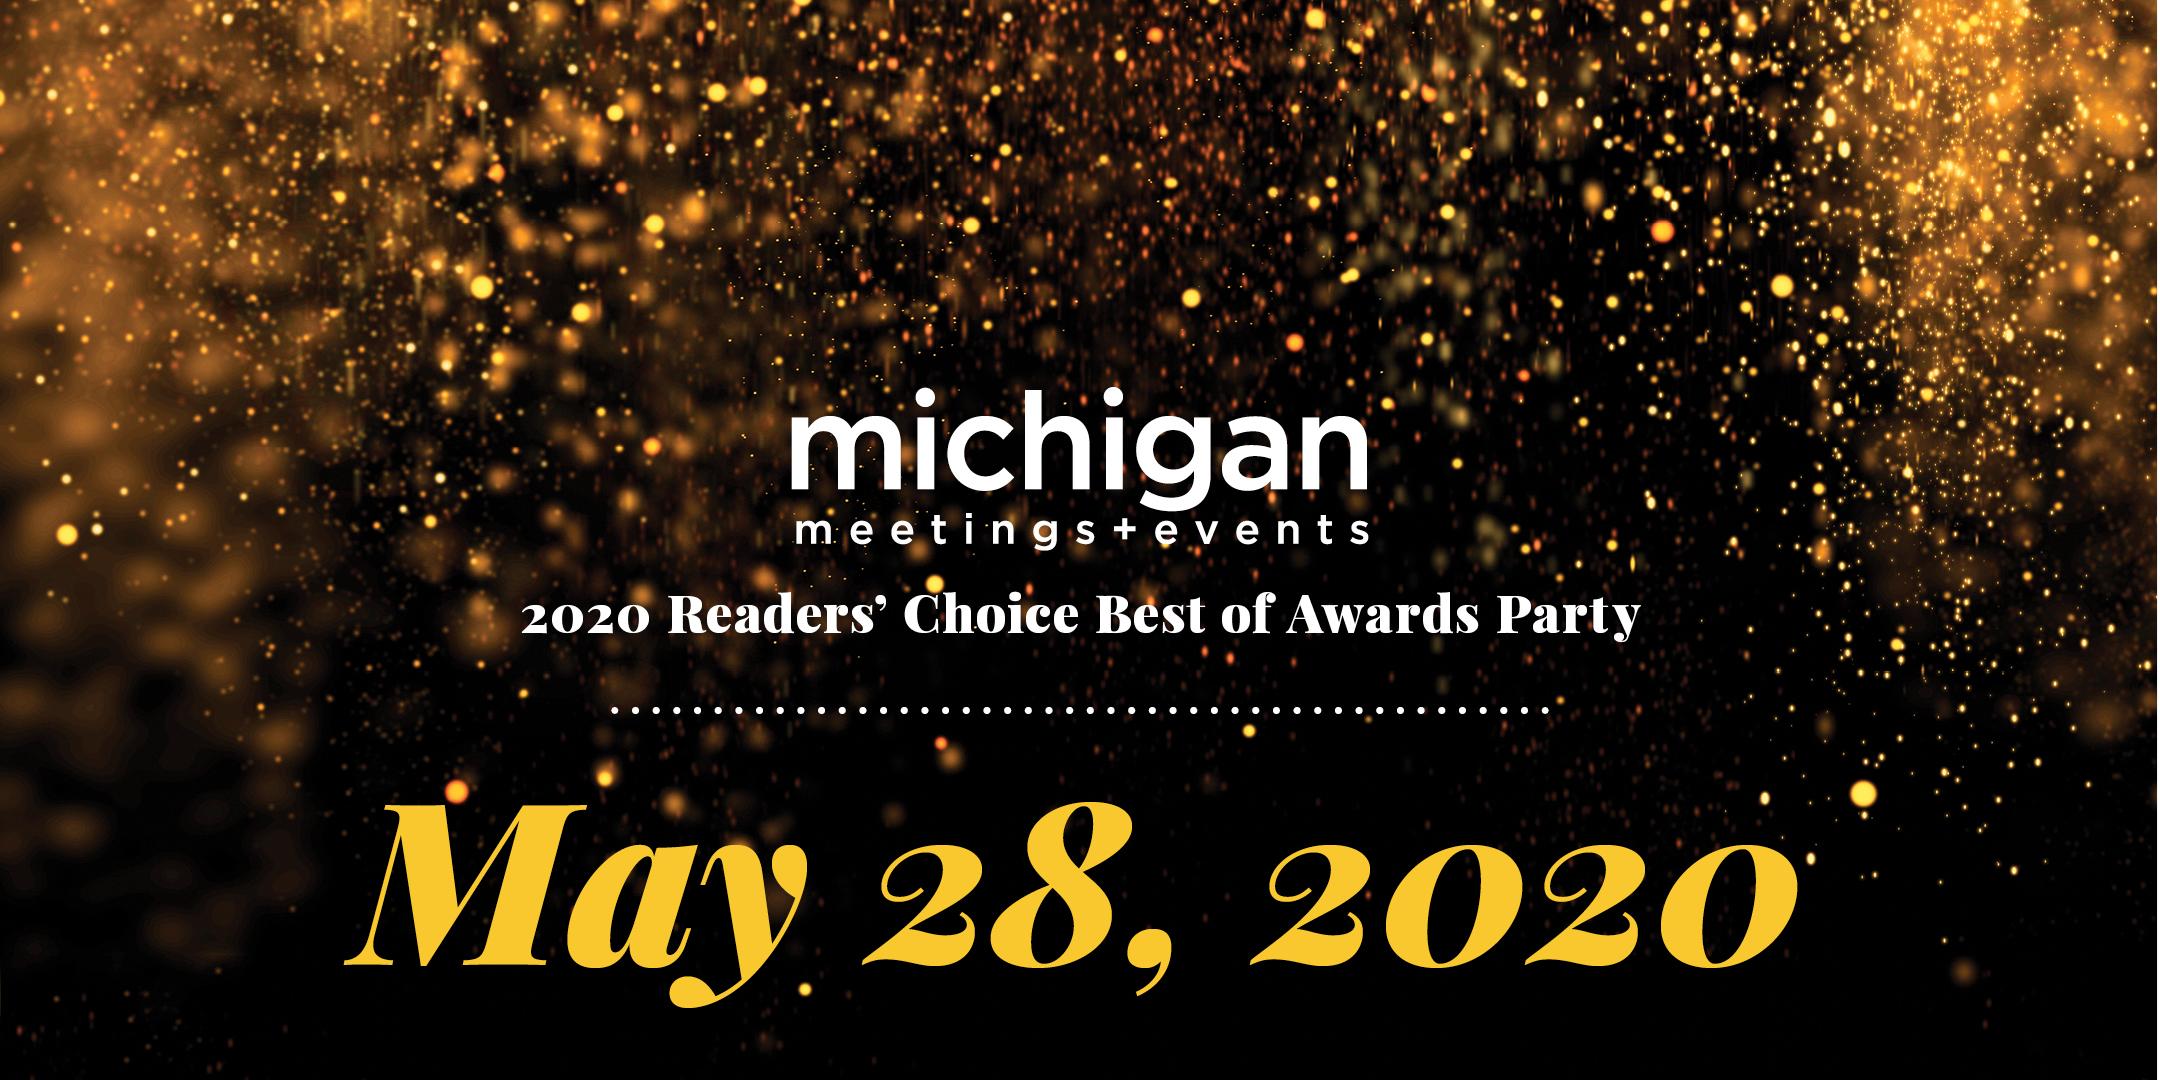 Michigan Meetings + Events Best of 2020 Readers' Choice Awards Party